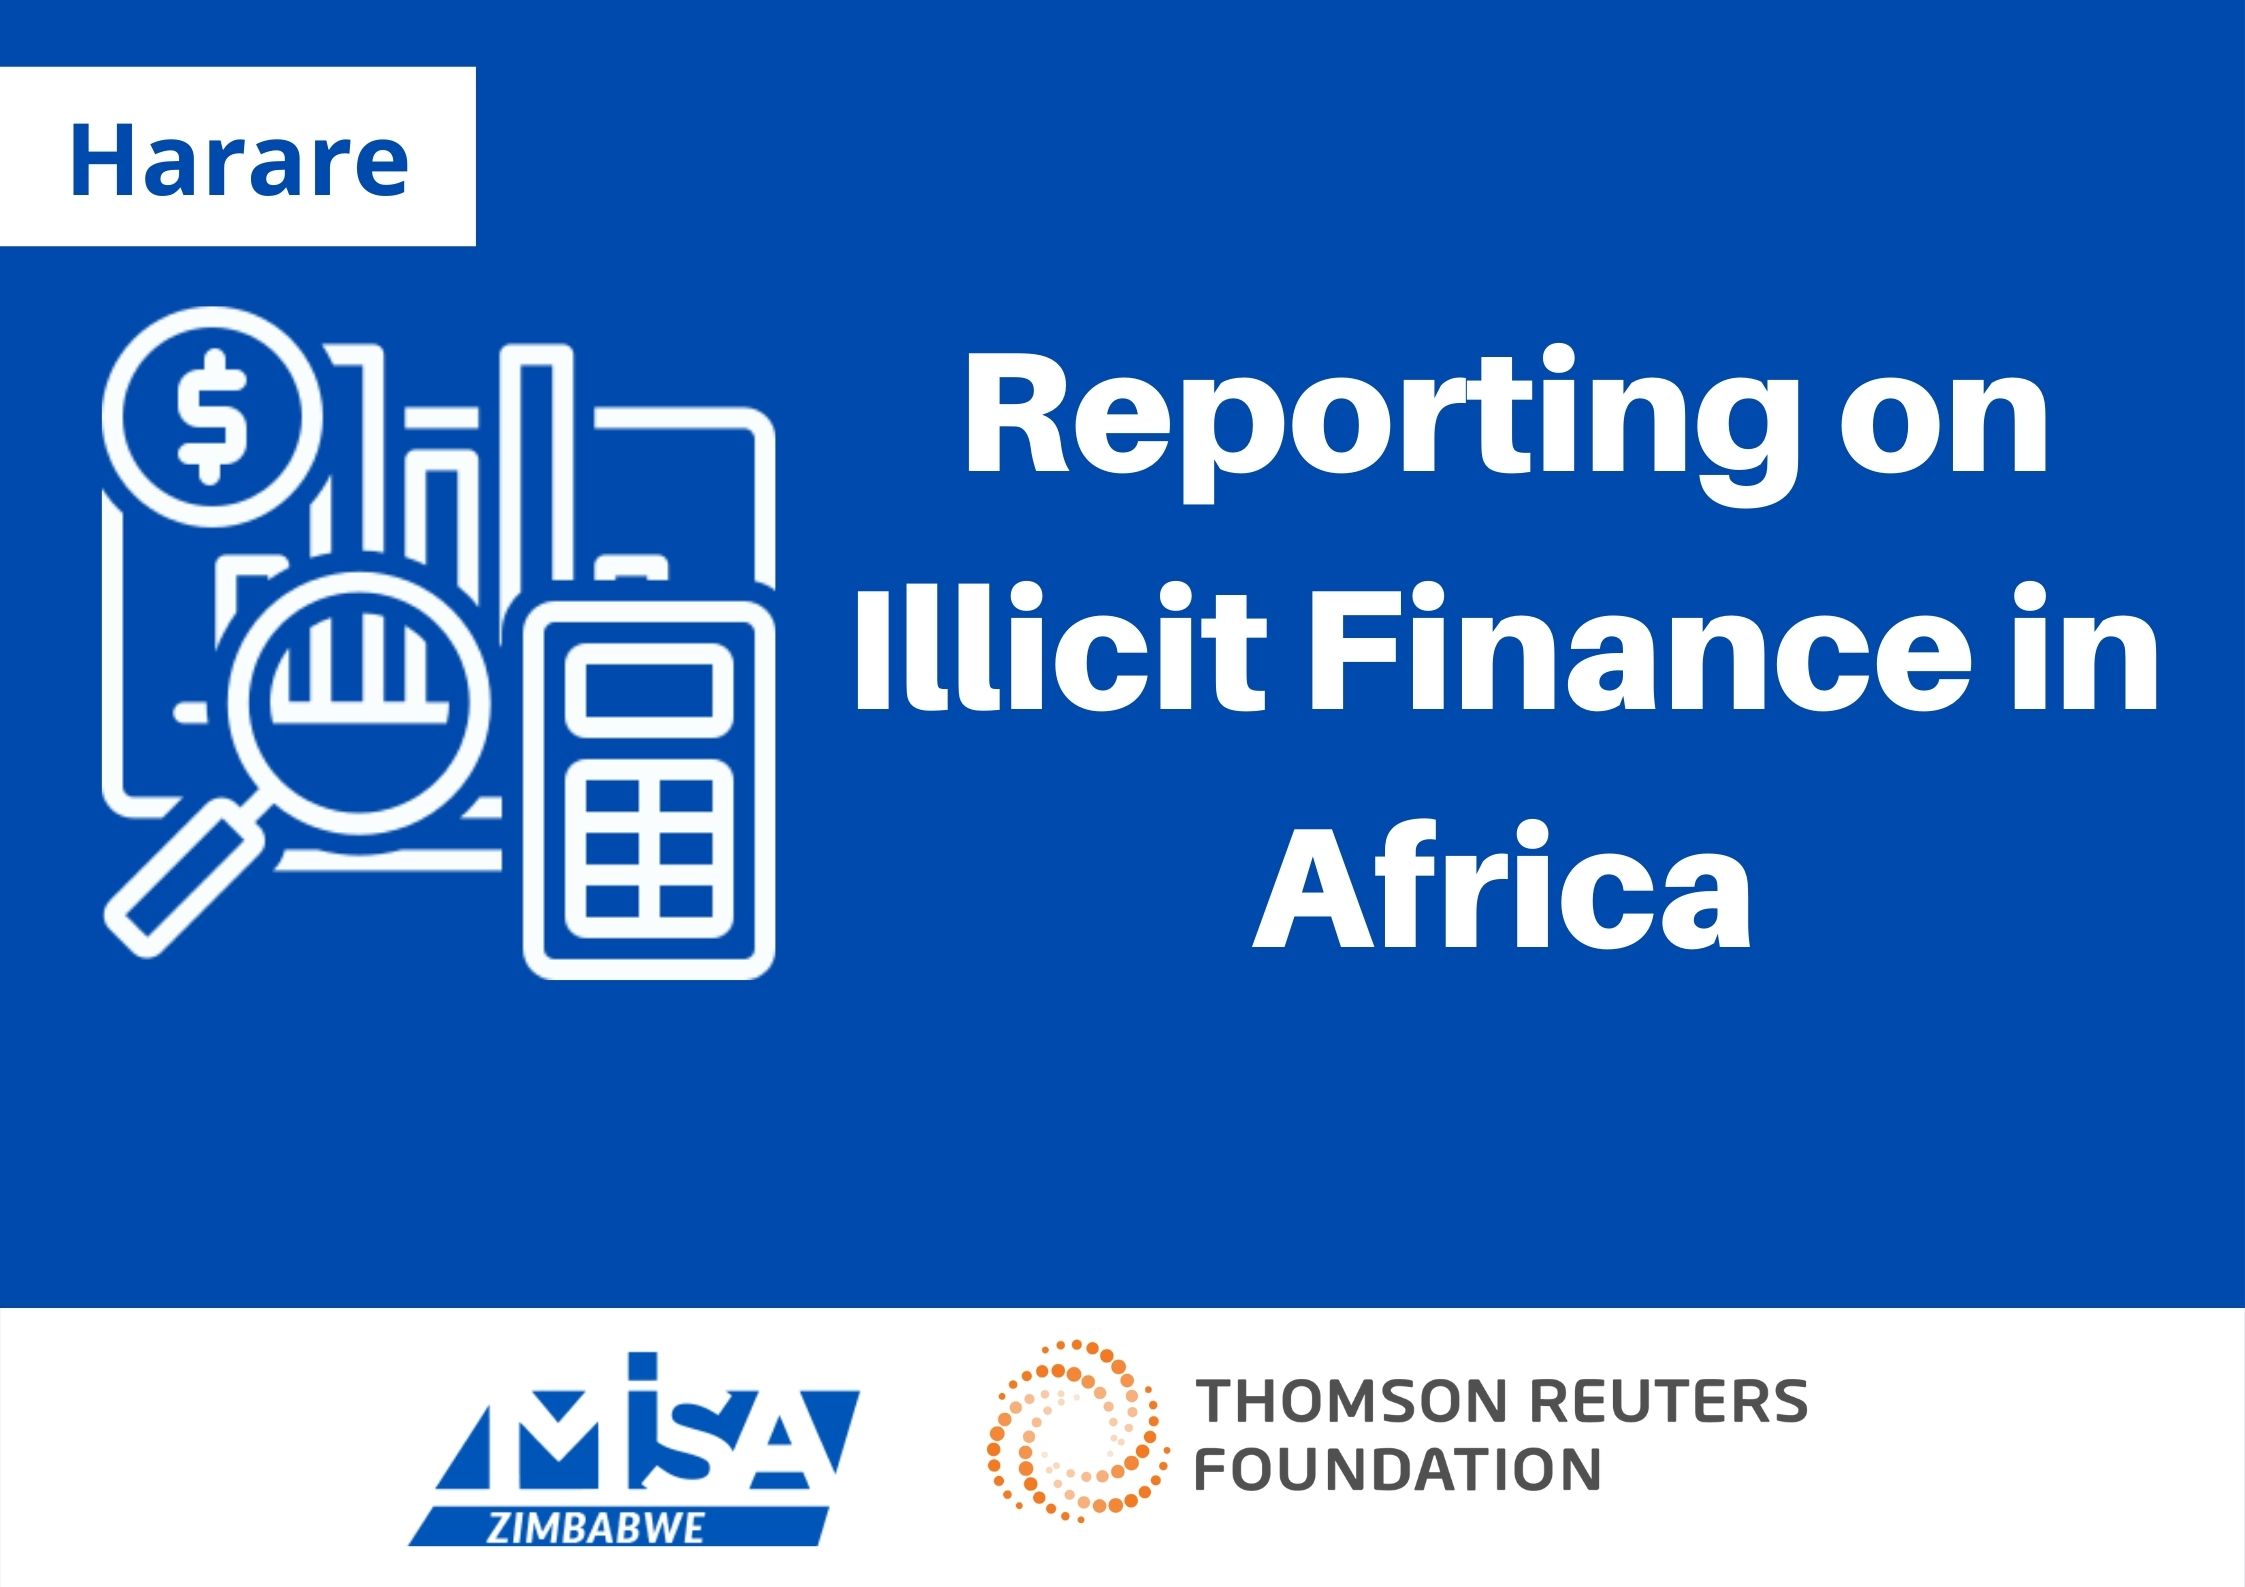 Reporting on Illicit Finance in Africa (Harare)